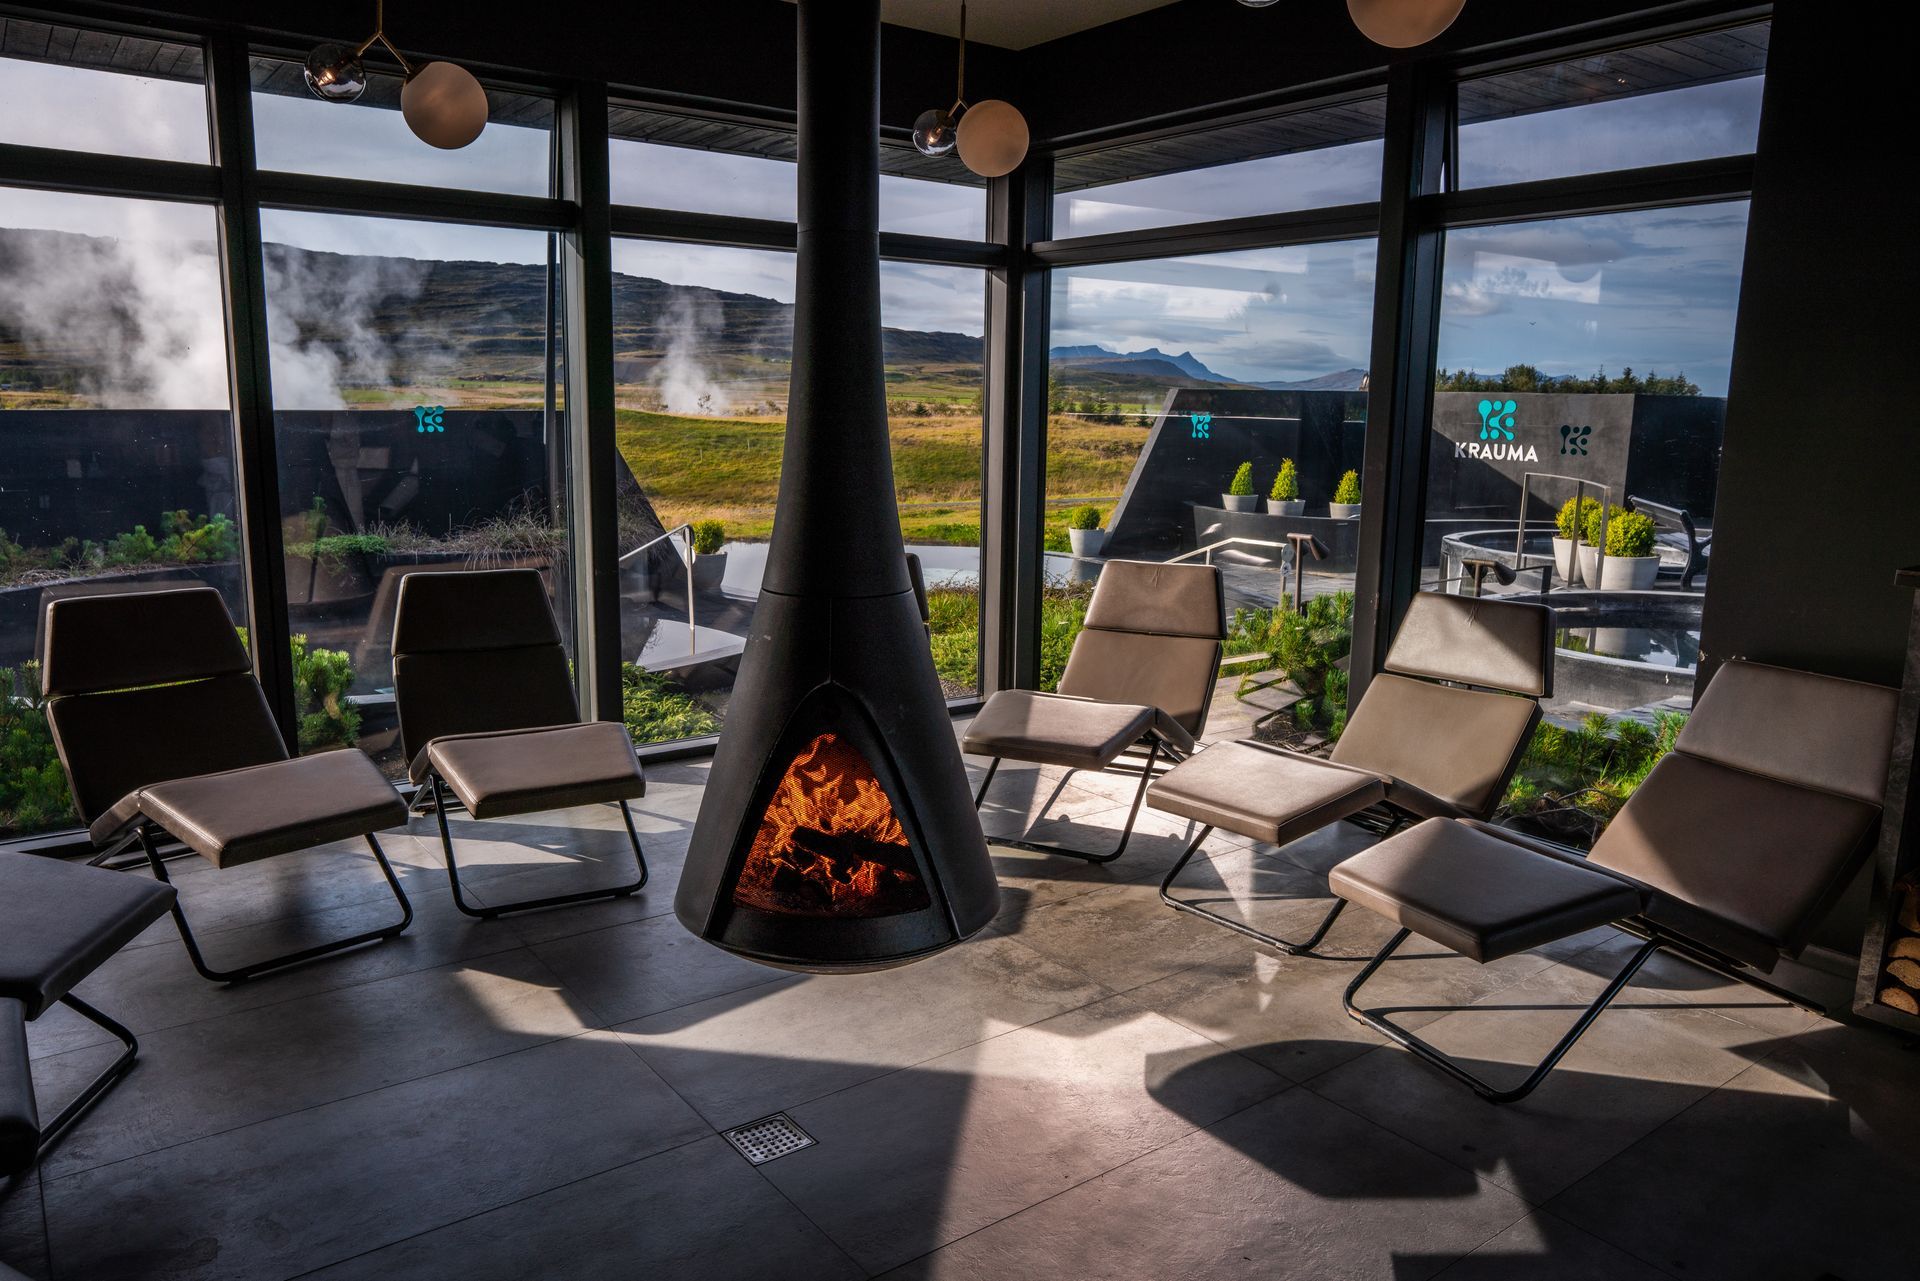 a fireplace in the middle of the room with chairs around it in the relaxation room at Krauma Geothermal In Iceland,